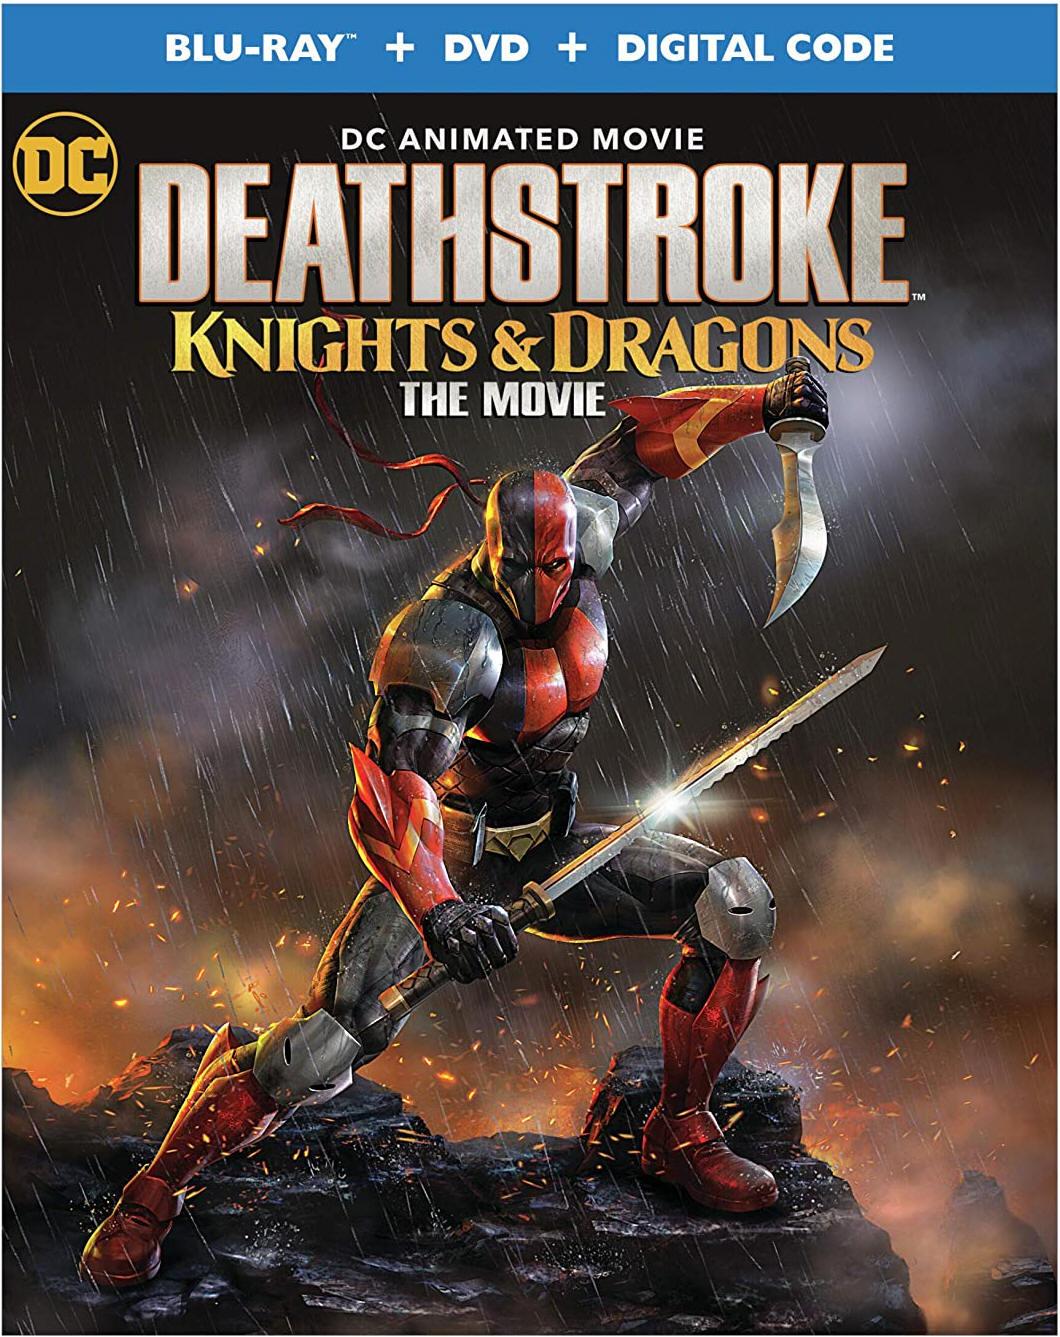 Deathstroke: Knights and Dragons The Movie - Amazon